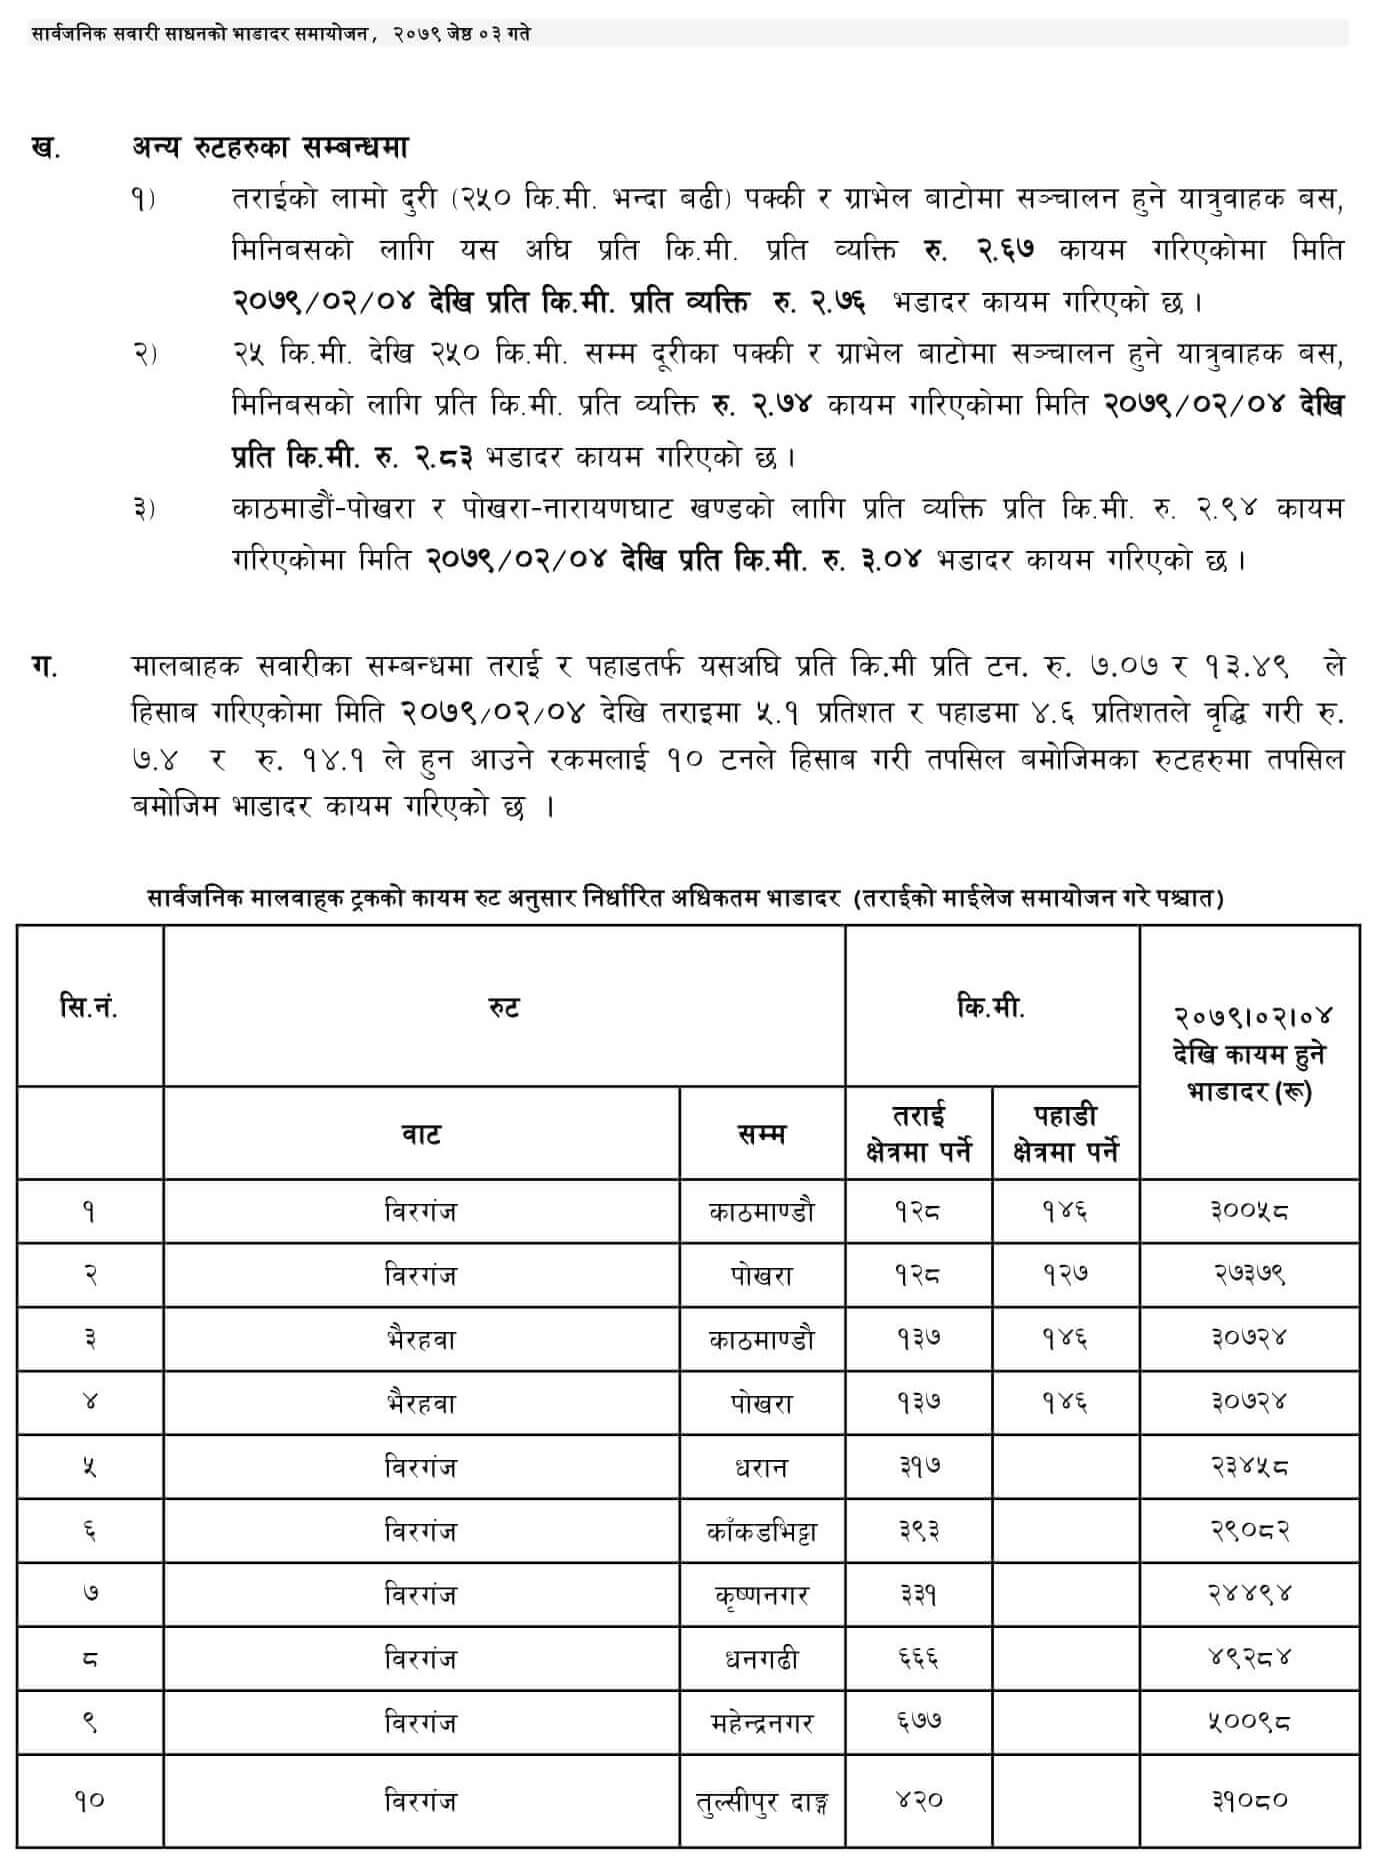 List of Public Transpiration New Fare in Nepal